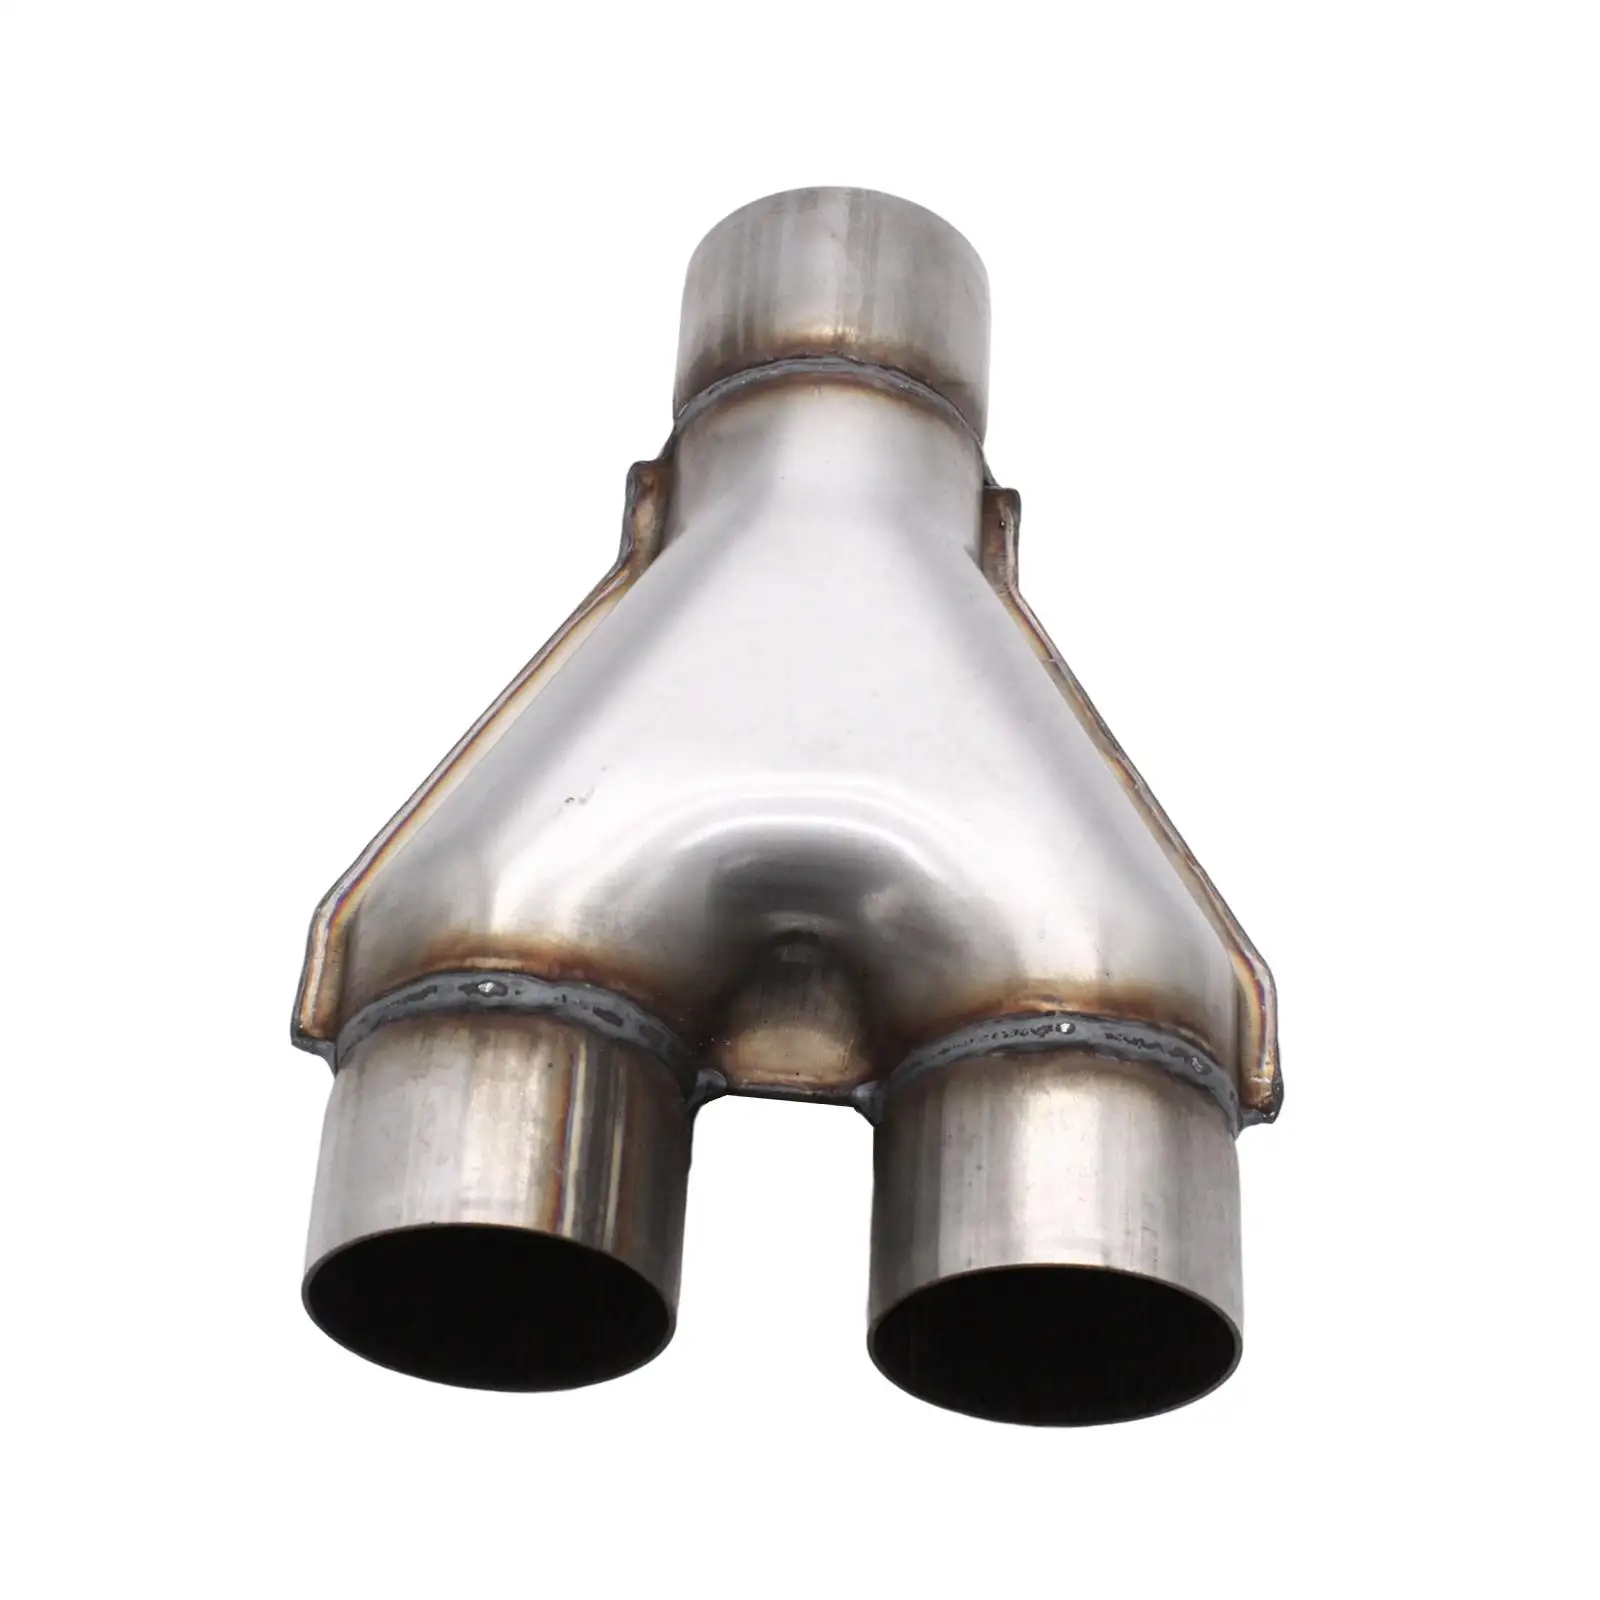 Exhaust Pipe Connector for Smoother Exhaust x Pipe Adapter for Hardware Professional Durable Replacement Easy to Install